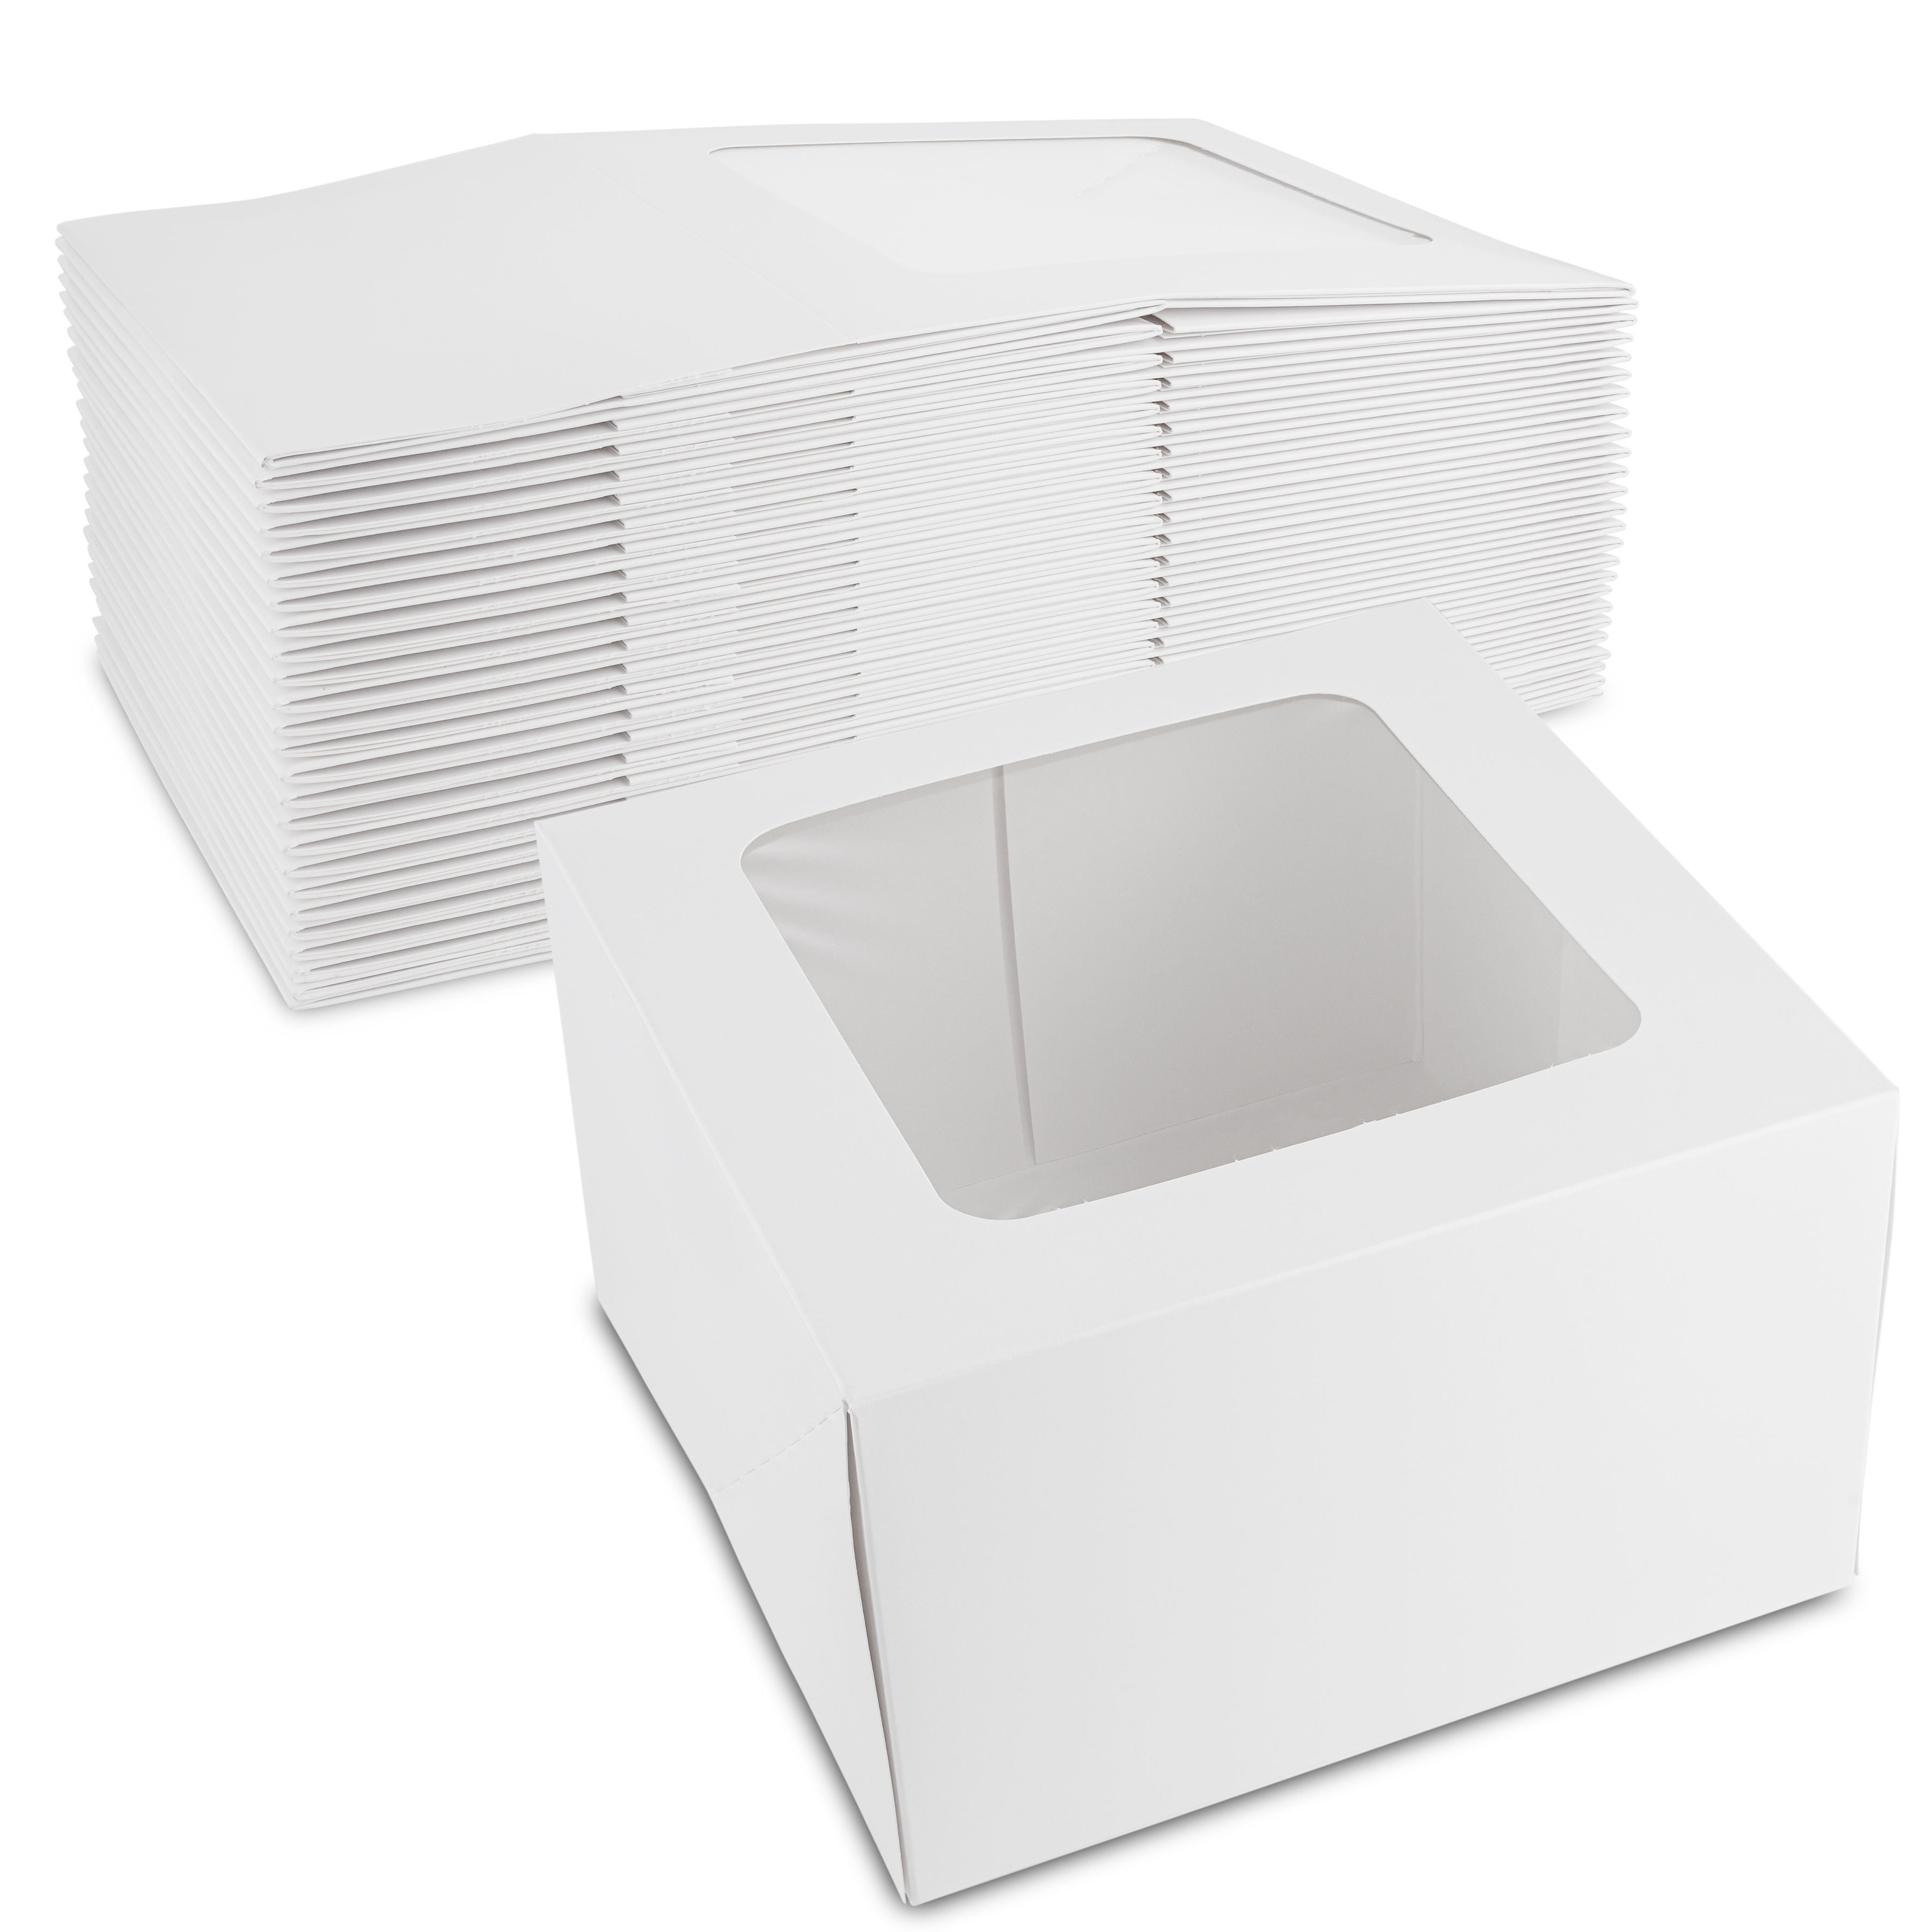 25 count WHITE 8x8x4 Bakery or Cake Box 